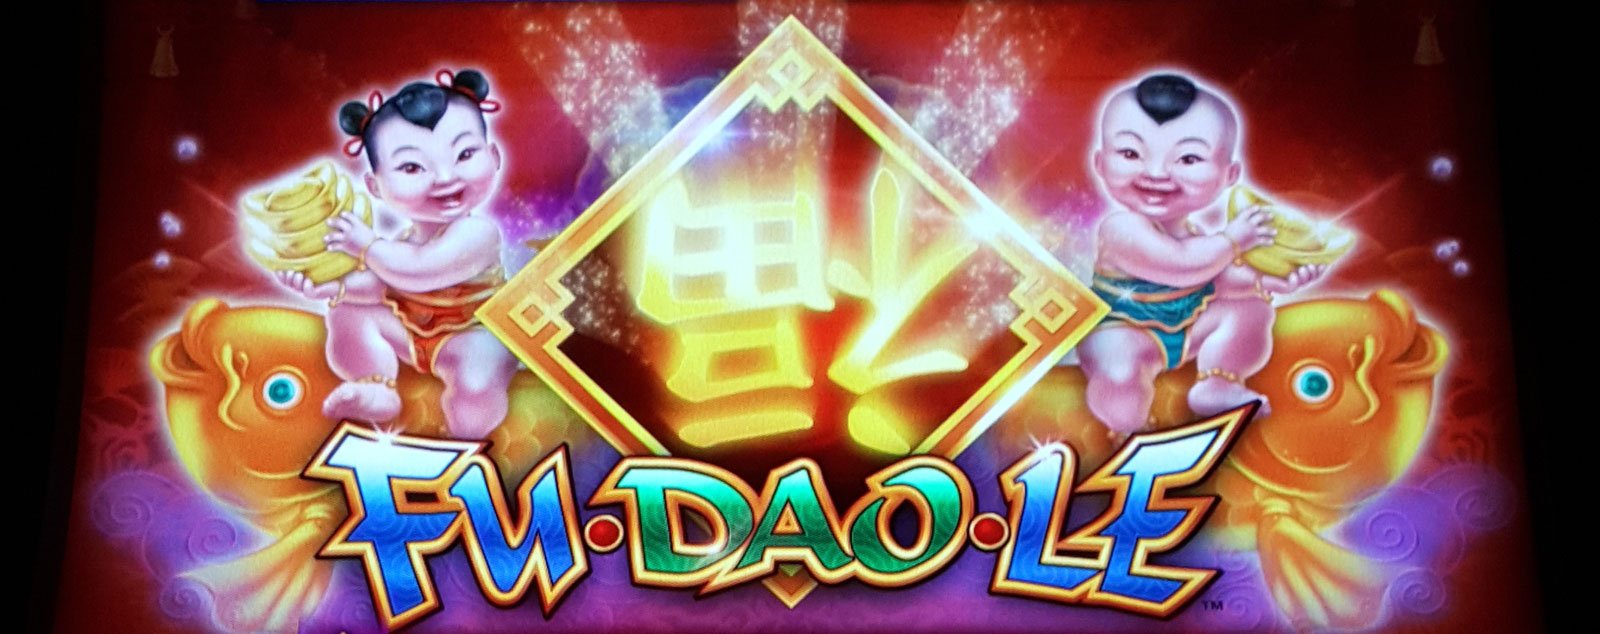 Play popular Fu Dao Le slot game by Bally online